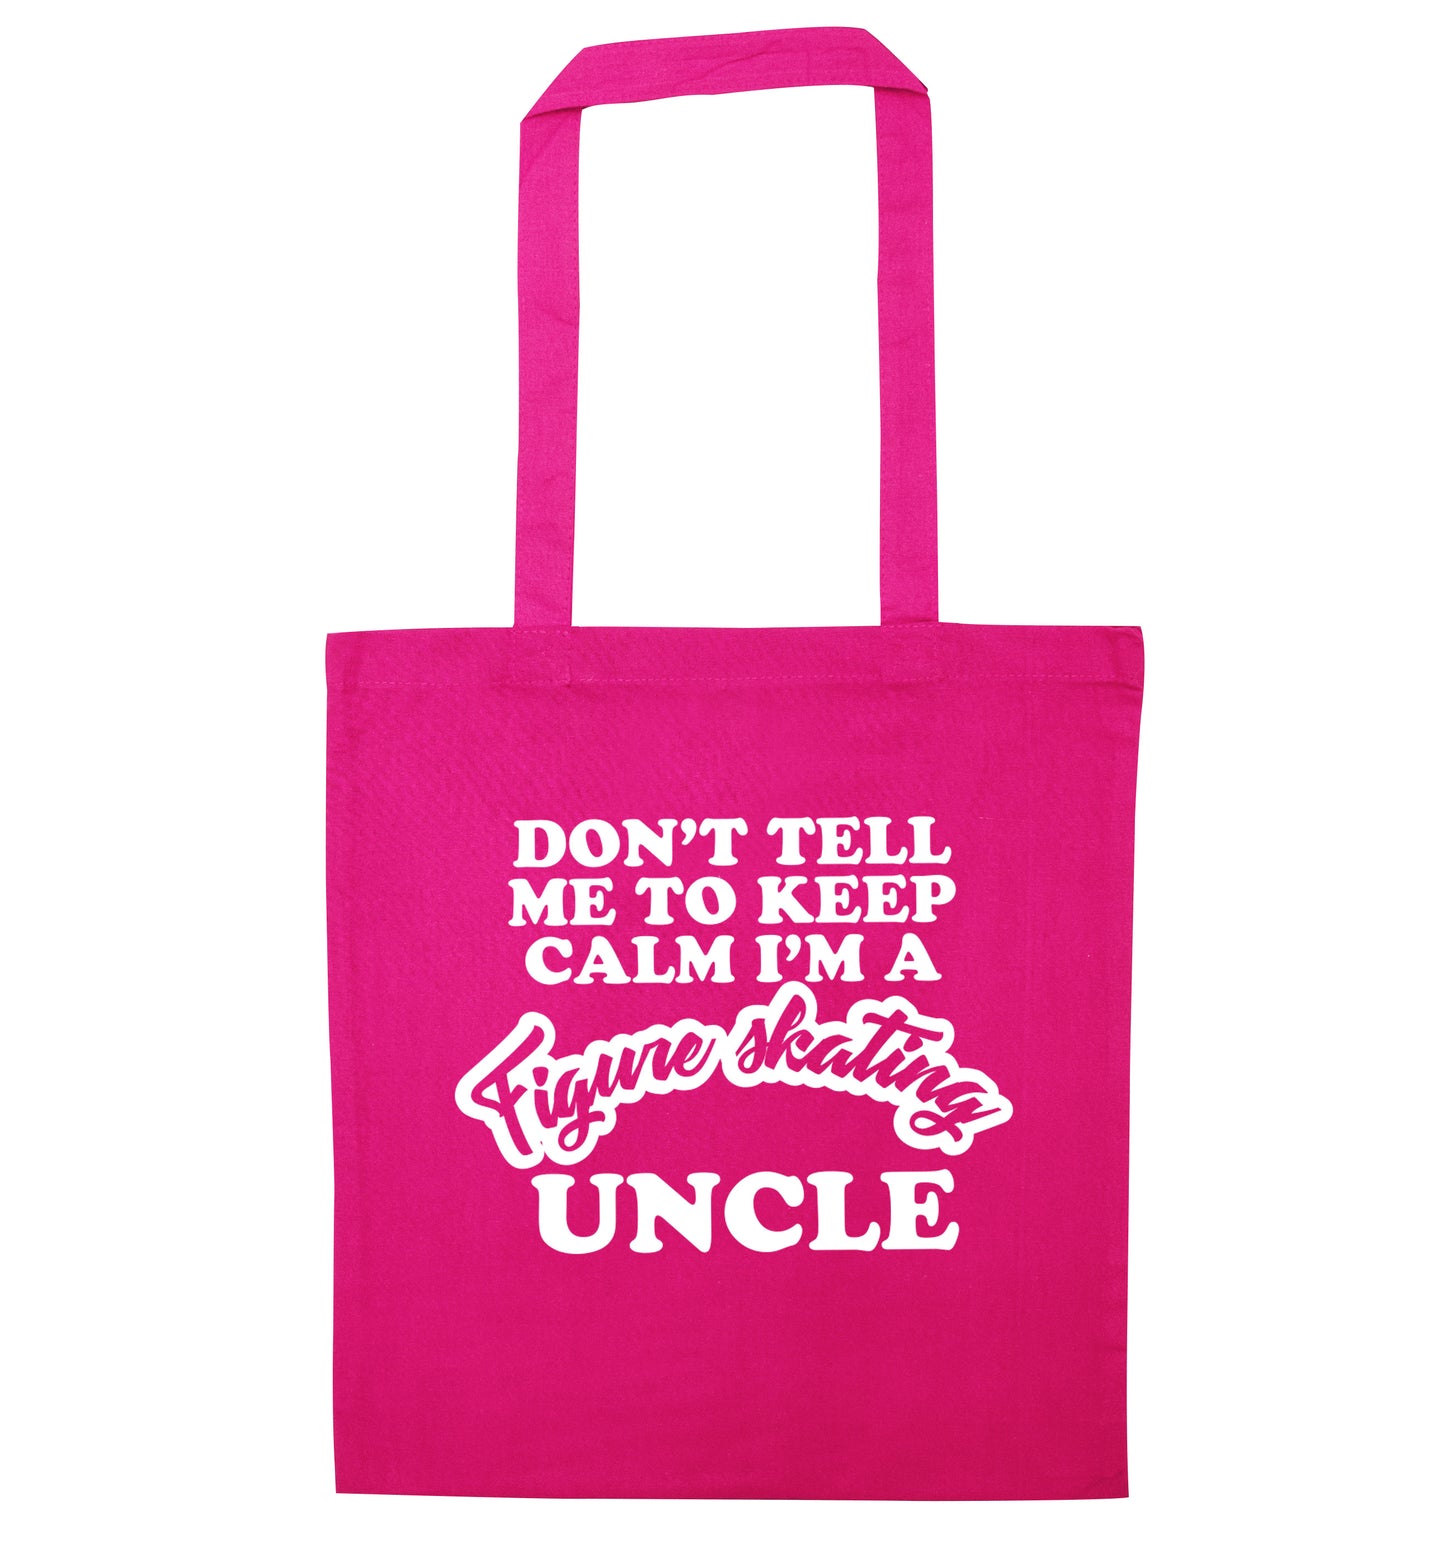 Don't tell me to keep calm I'm a figure skating uncle pink tote bag